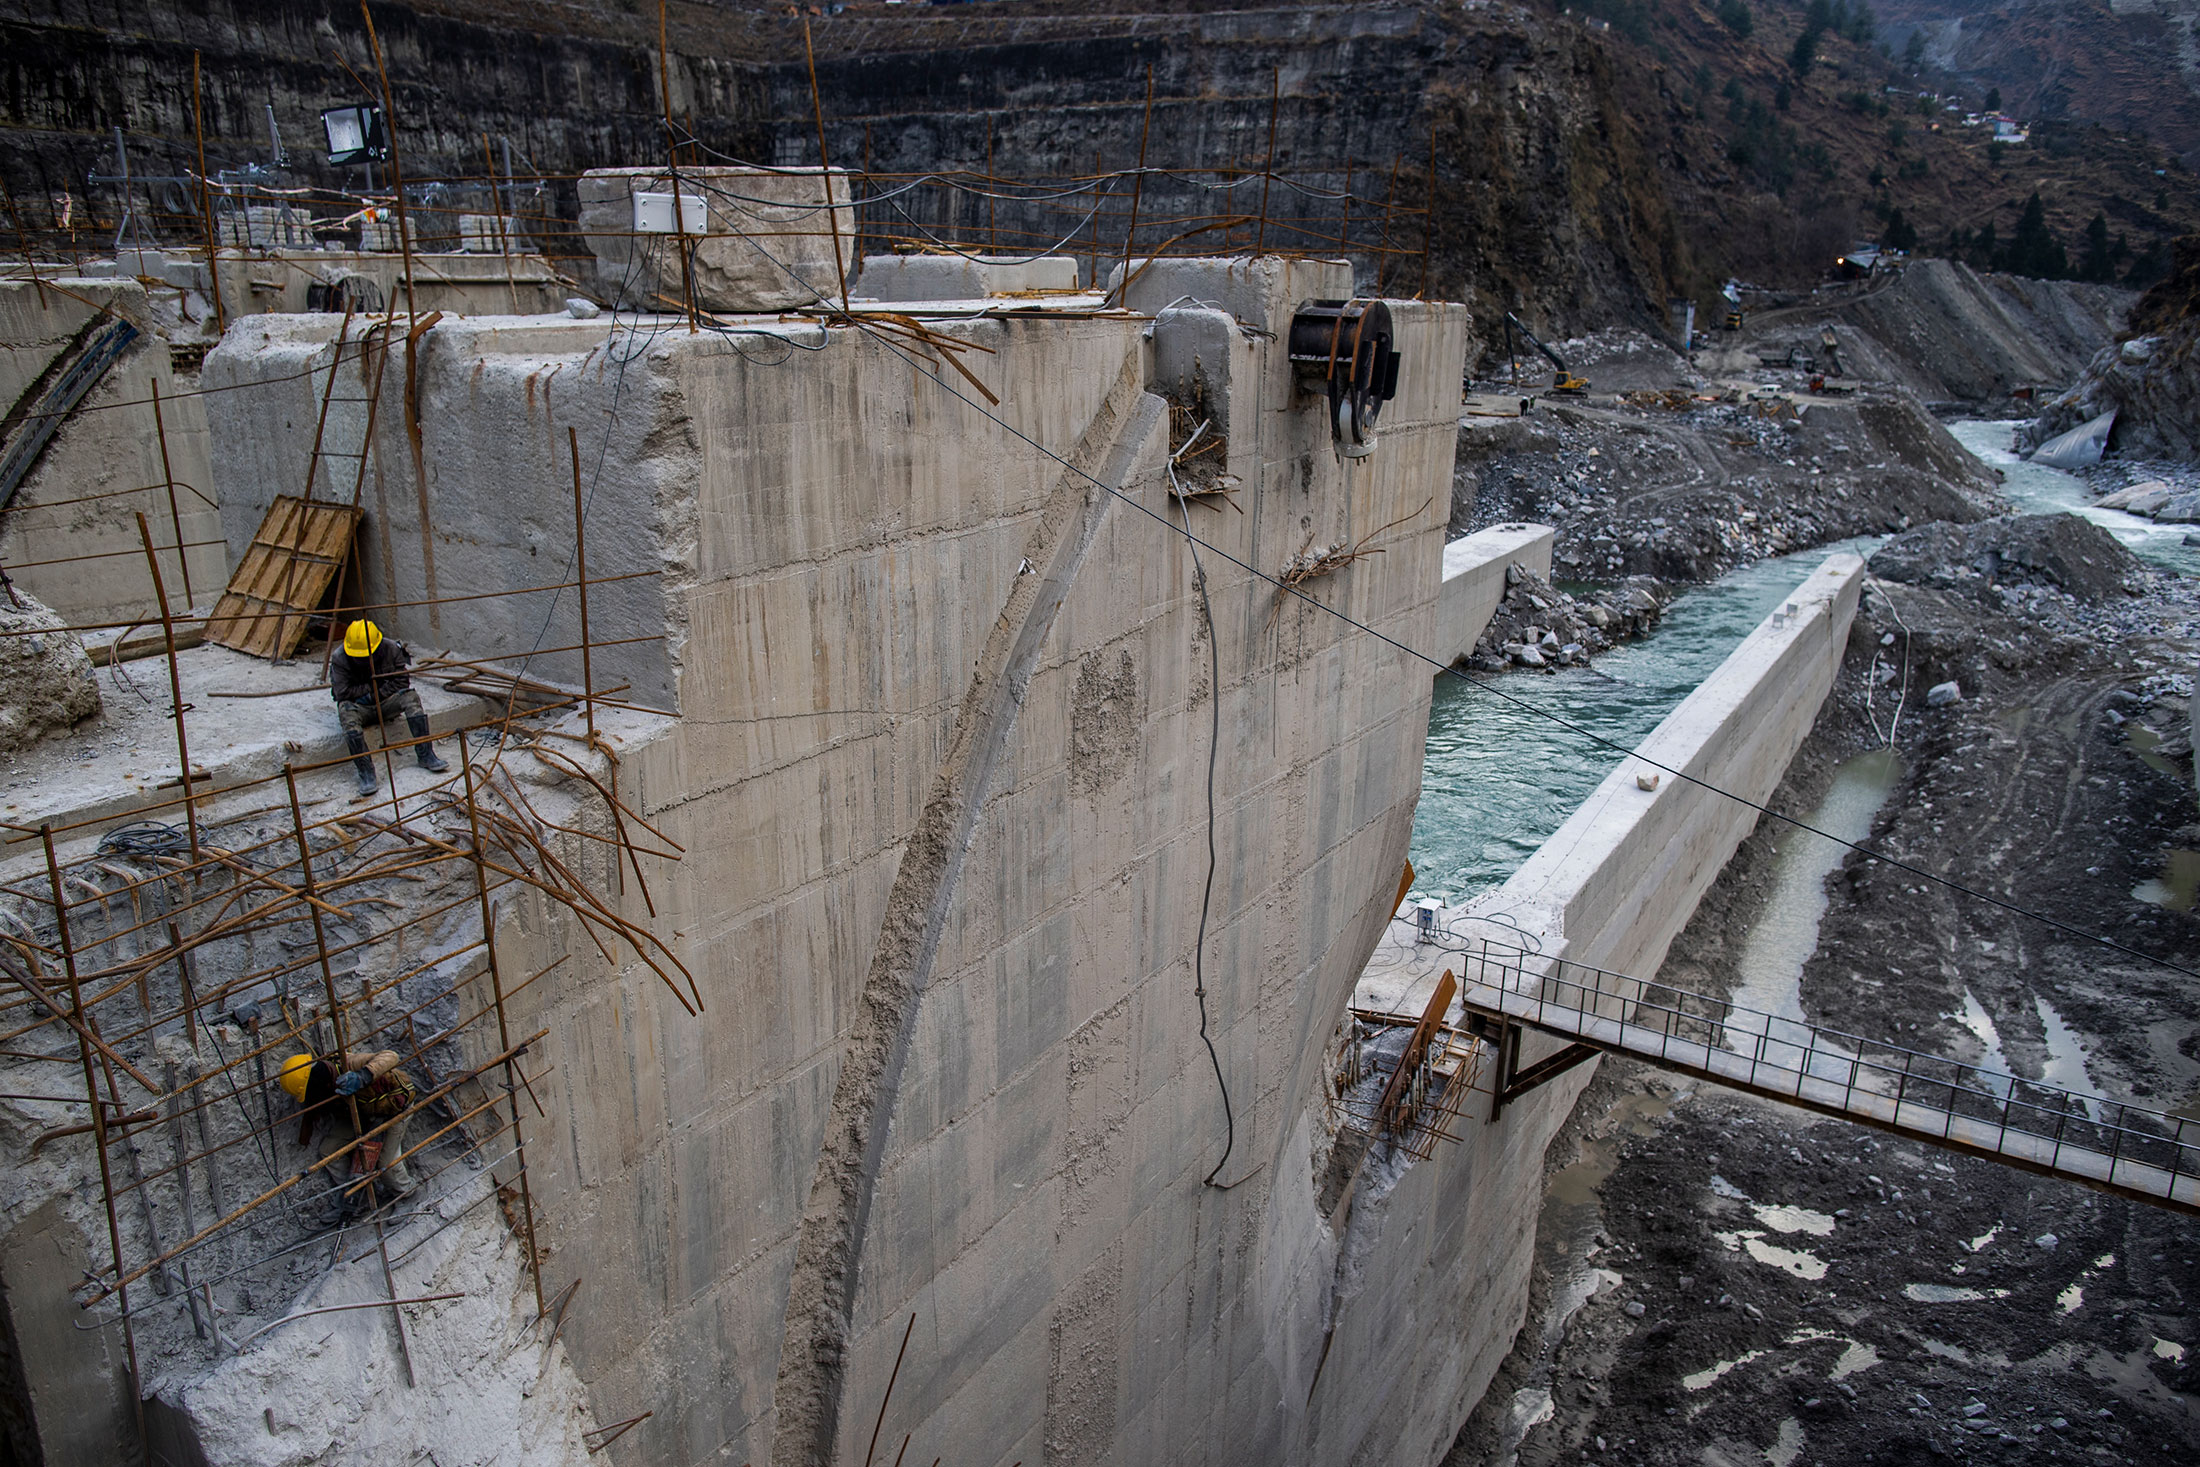 Water can be reused to produce hydroelectric power.